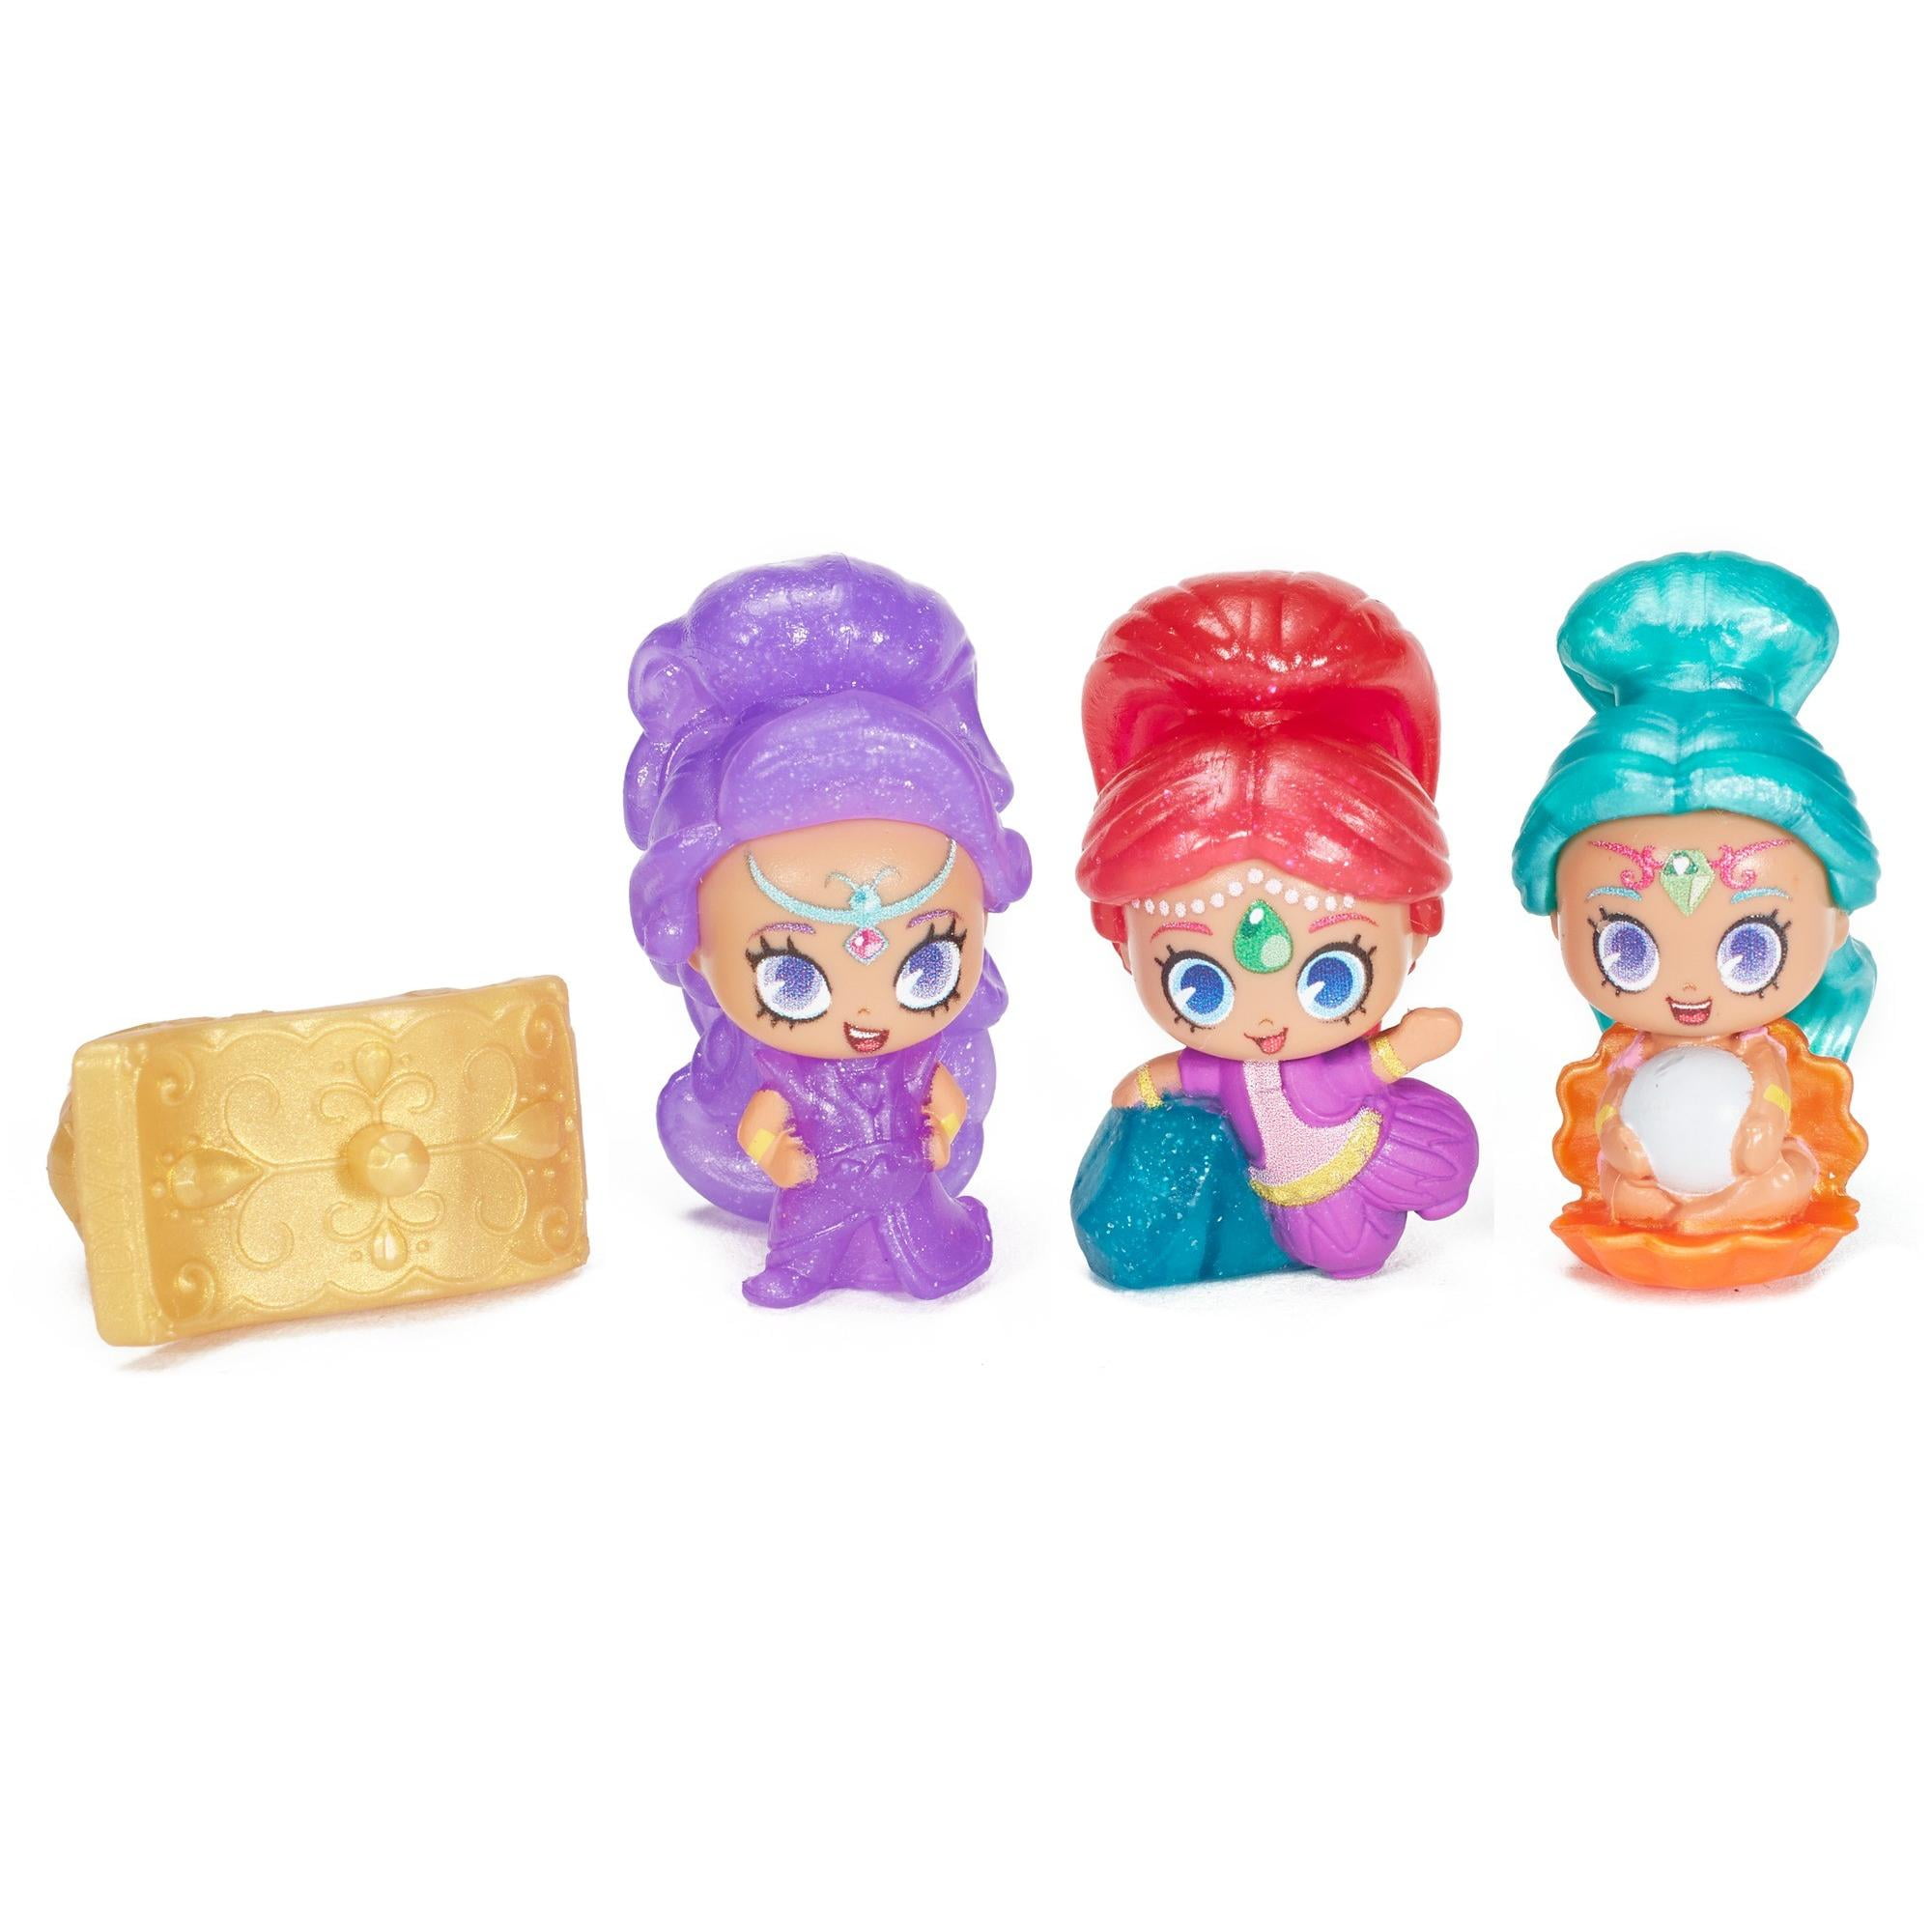 3 x SHIMMER AND SHINE TEENIE GENIES RINGS FIGURE TOY Colour Changing Collectable 